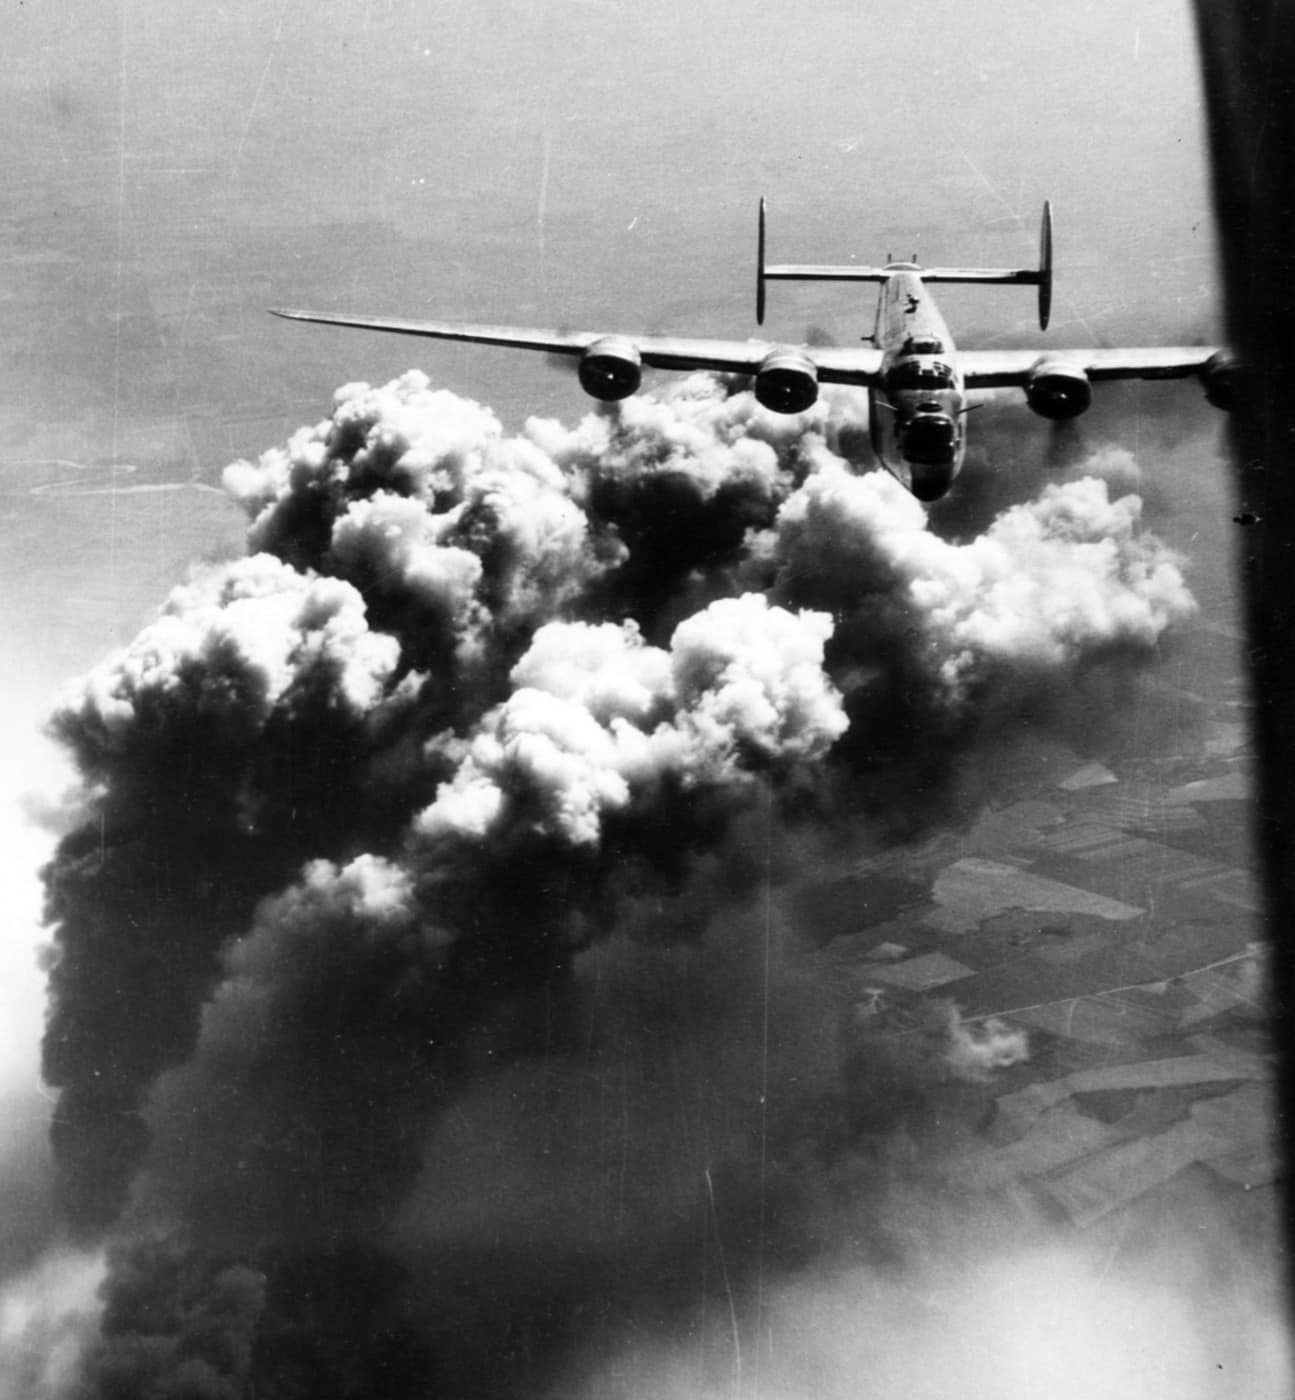 This photo shows columns of smoke rising up from burning petroleum at a refinery that was hit by a B-24 raid. This was the kind of bombing raid that led directly to Operation Gunn.